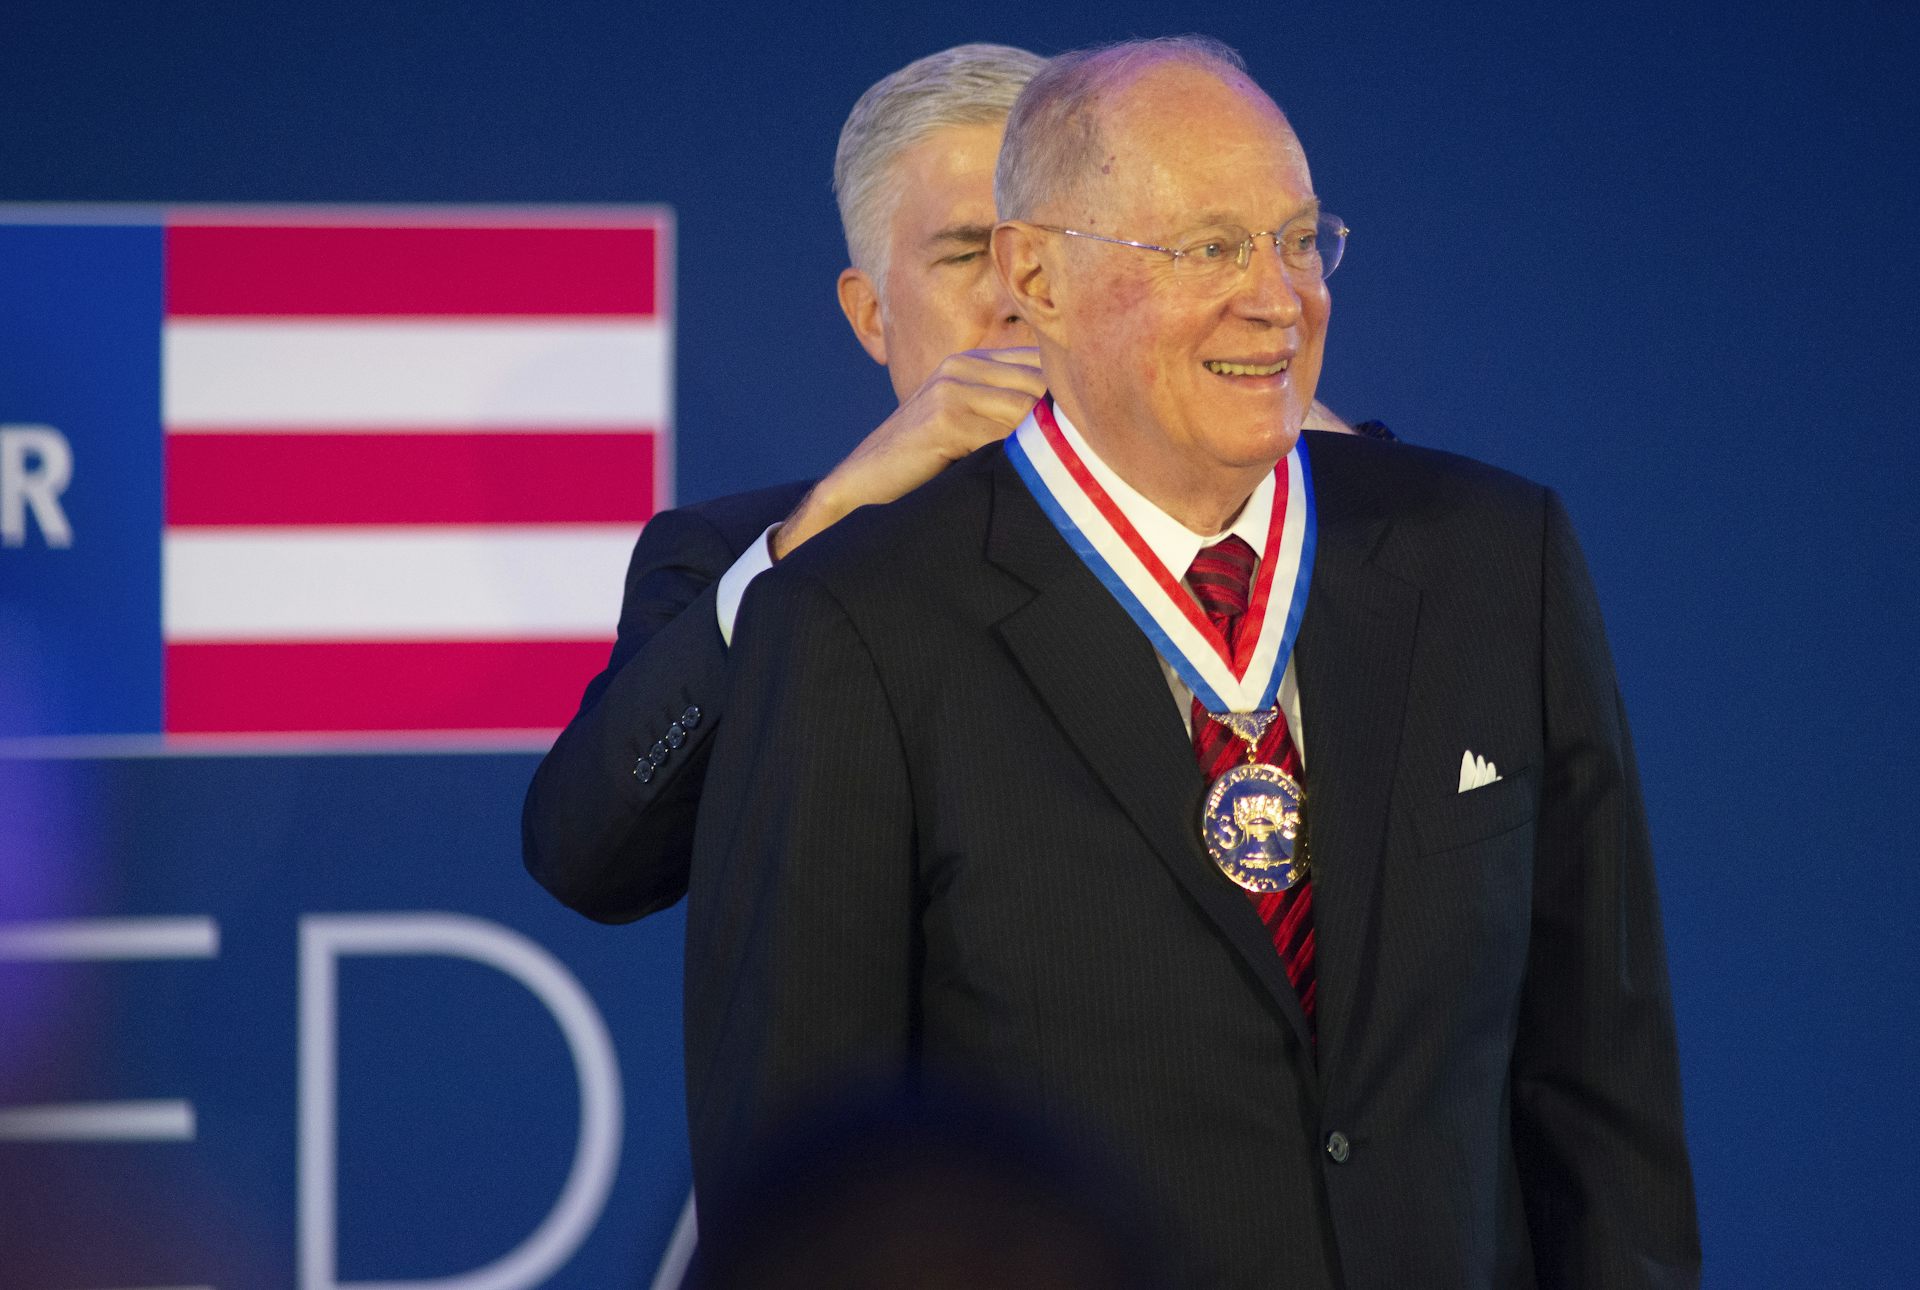 Supreme Court Justice Anthony Kennedy is presented a medal.